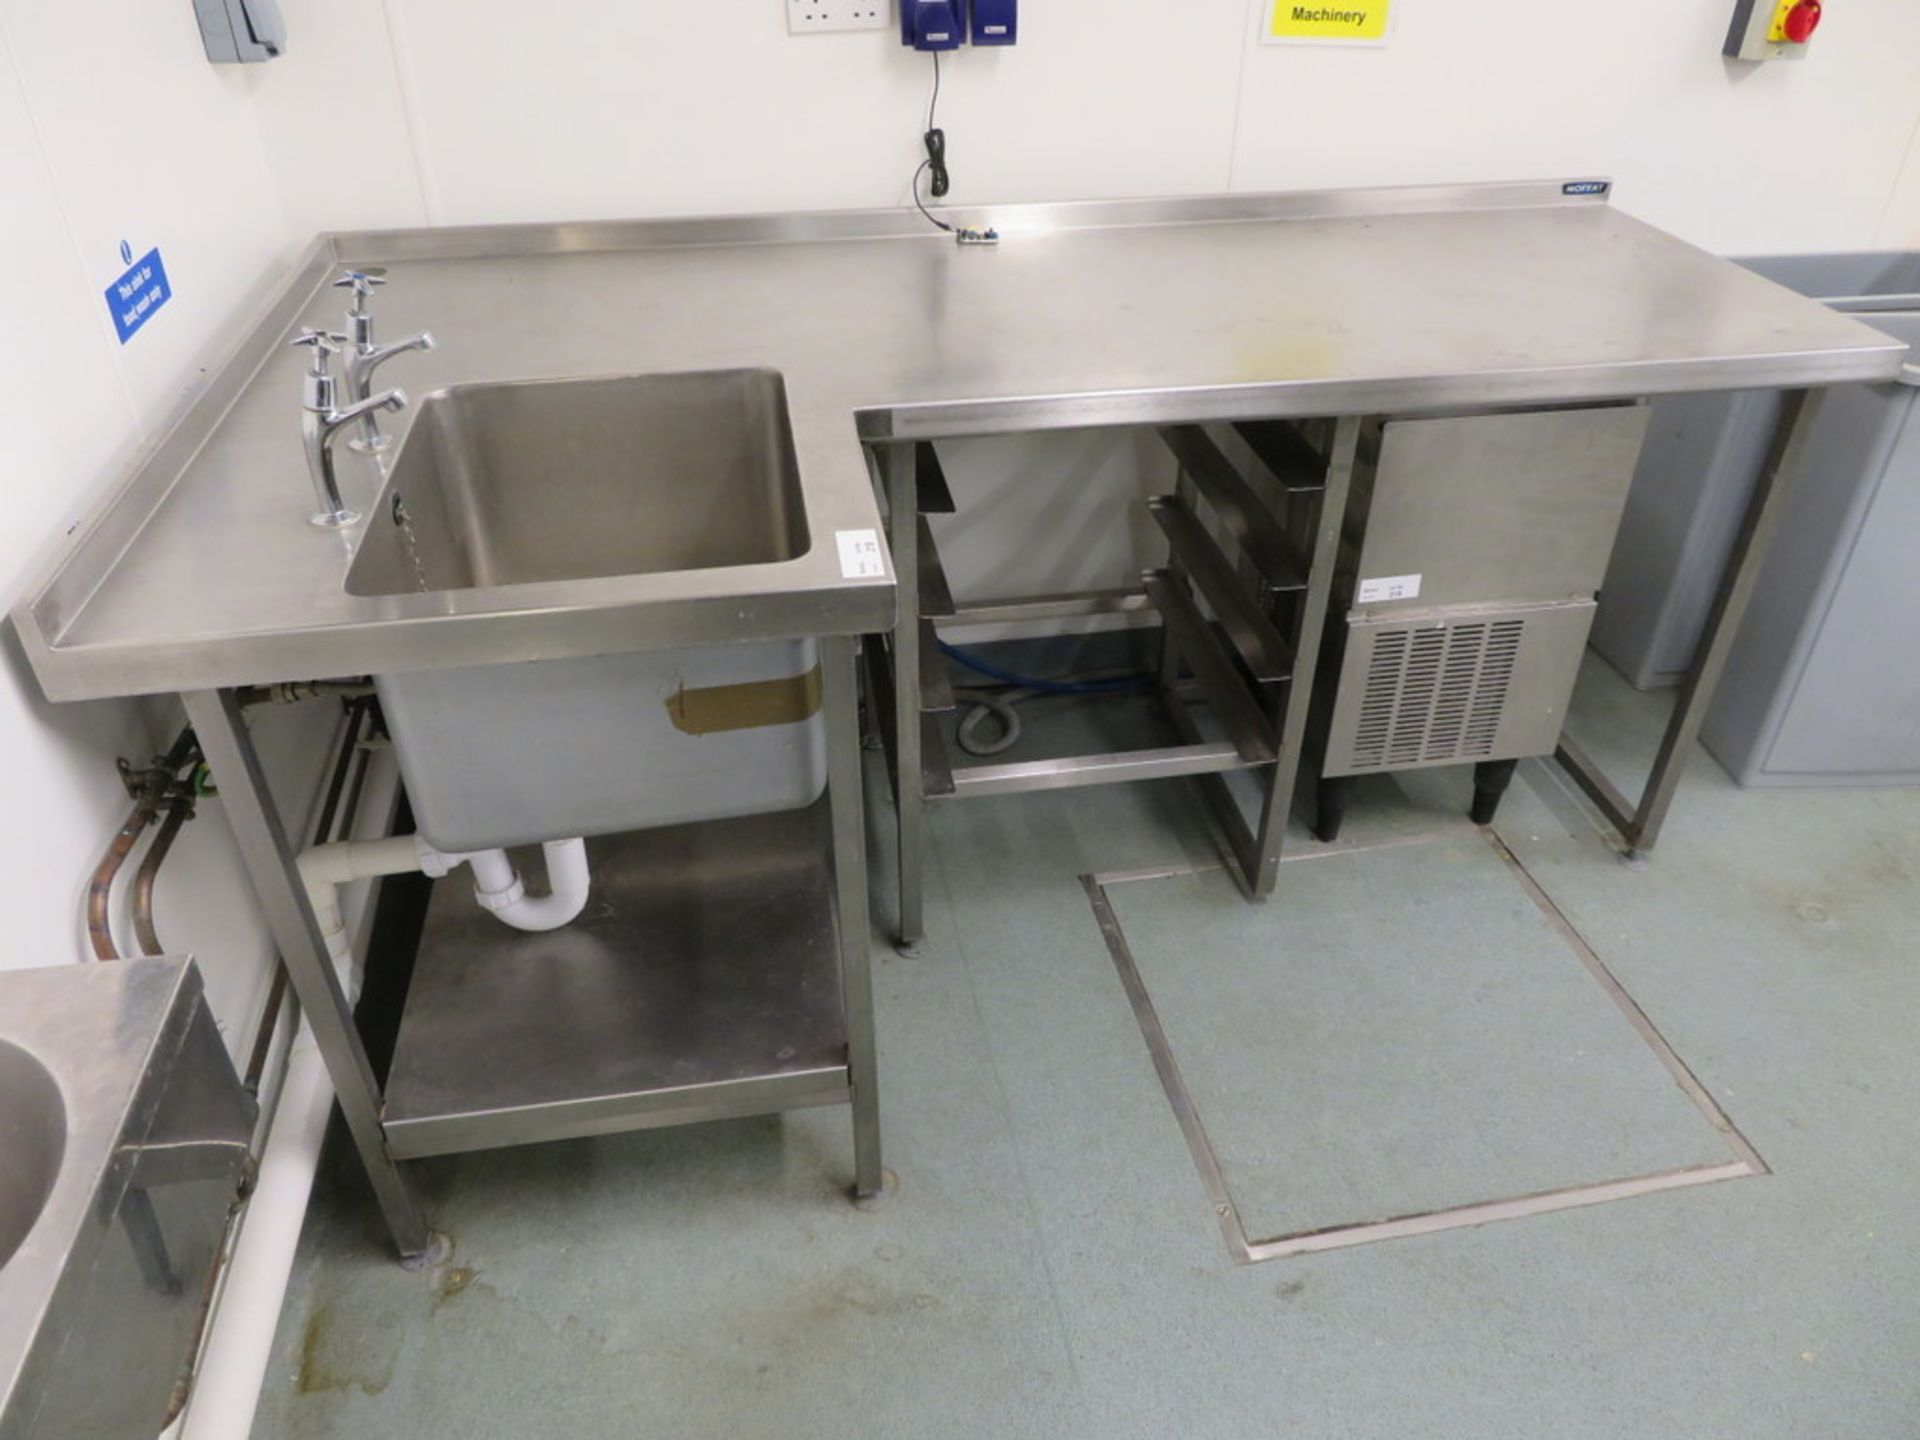 MOFFAT STAINLESS STEEL CORNER SINK UNIT WITH TRAY RACK AND UNDERSHELF - Image 2 of 2